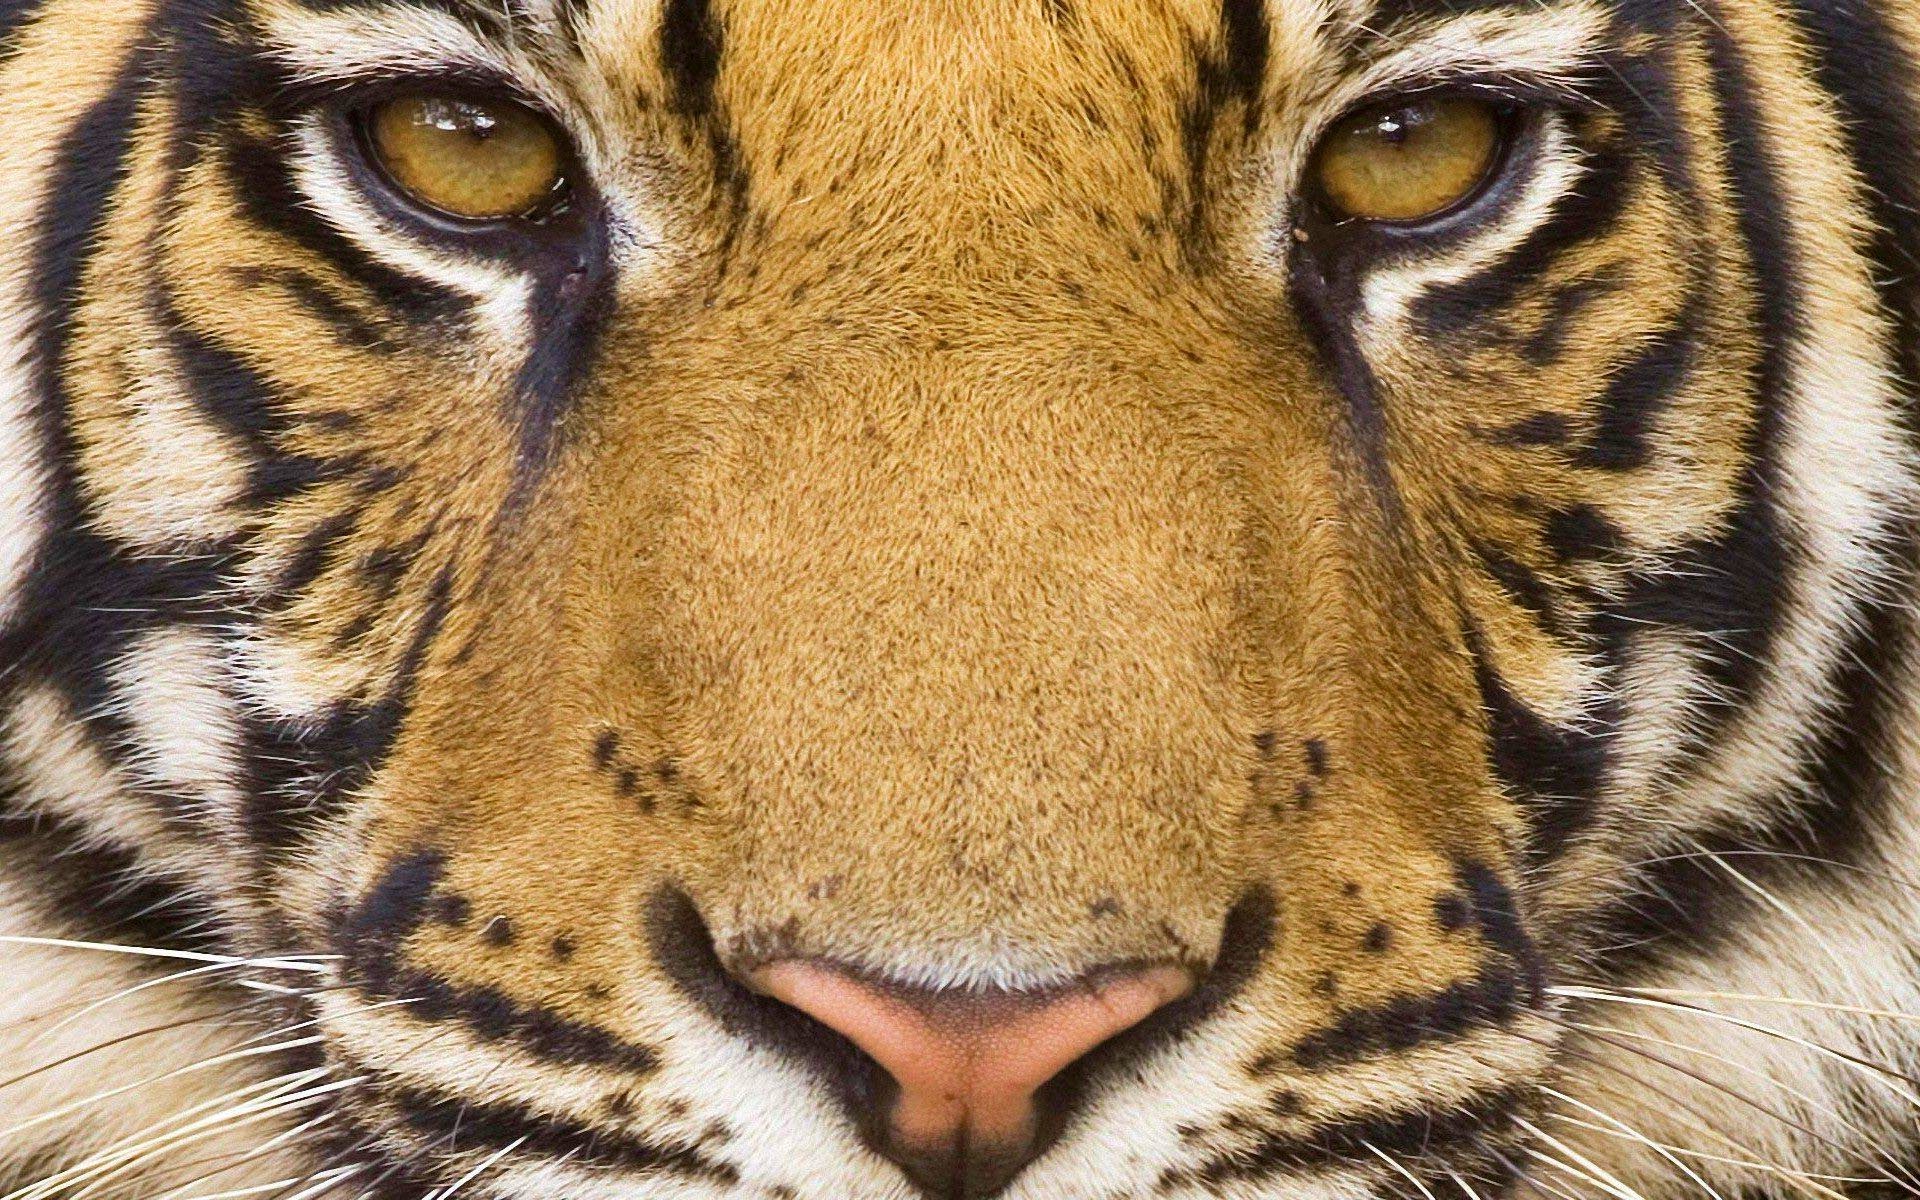 Tiger Closeup Face Details Wallpaper and Photo Download by PHOTOSof ...